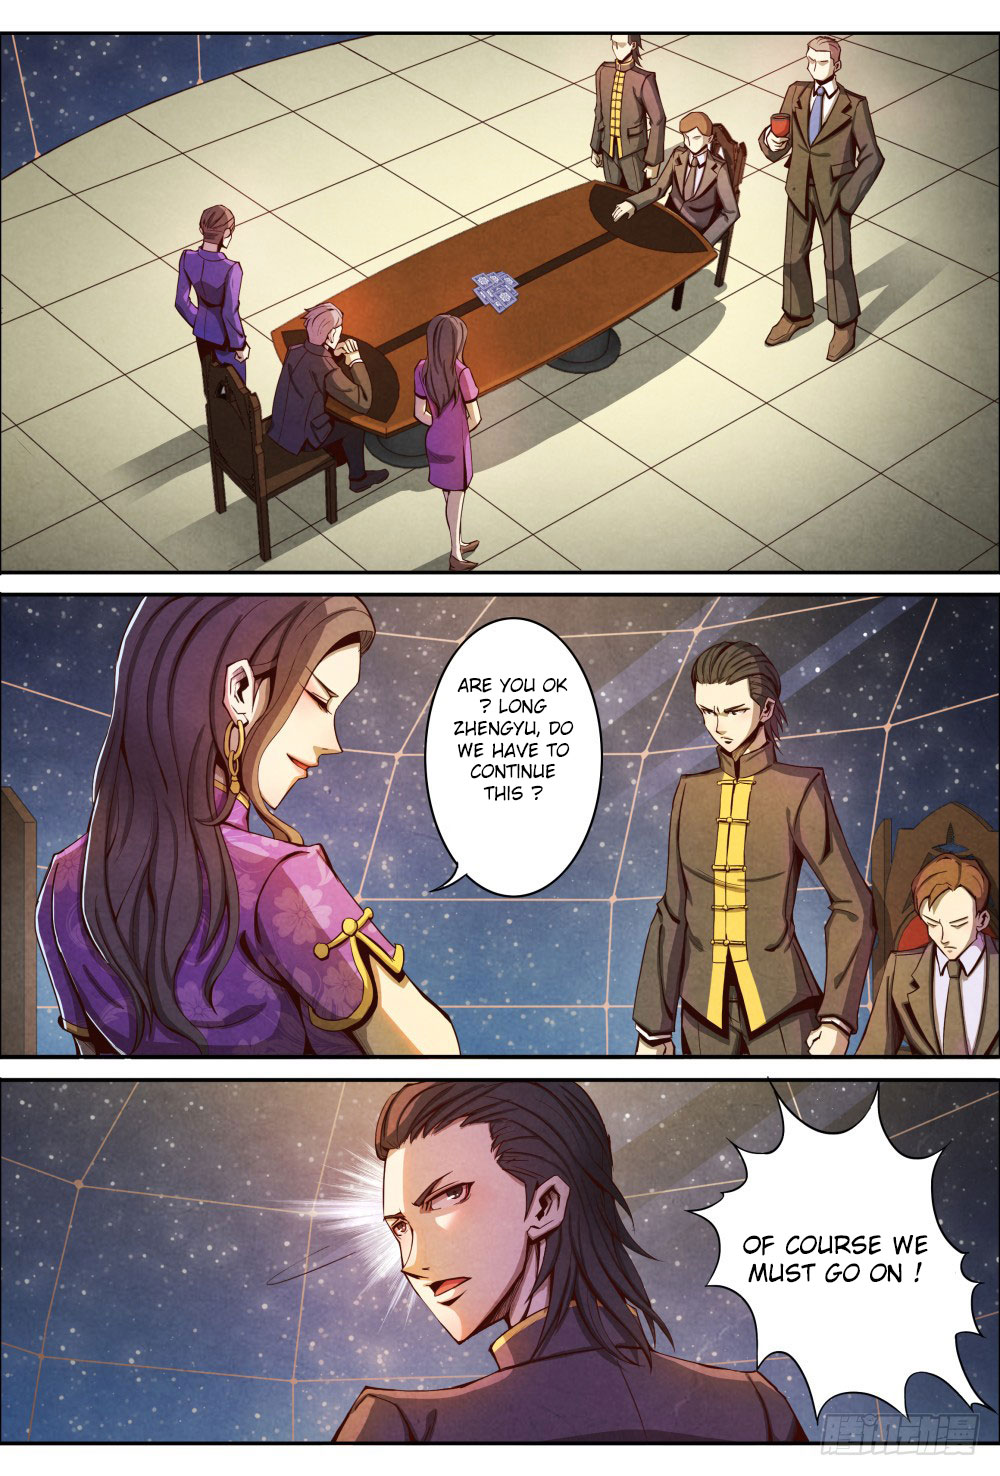 Return From the World of Immortals Vol. 1 Ch. 8 the confrontation